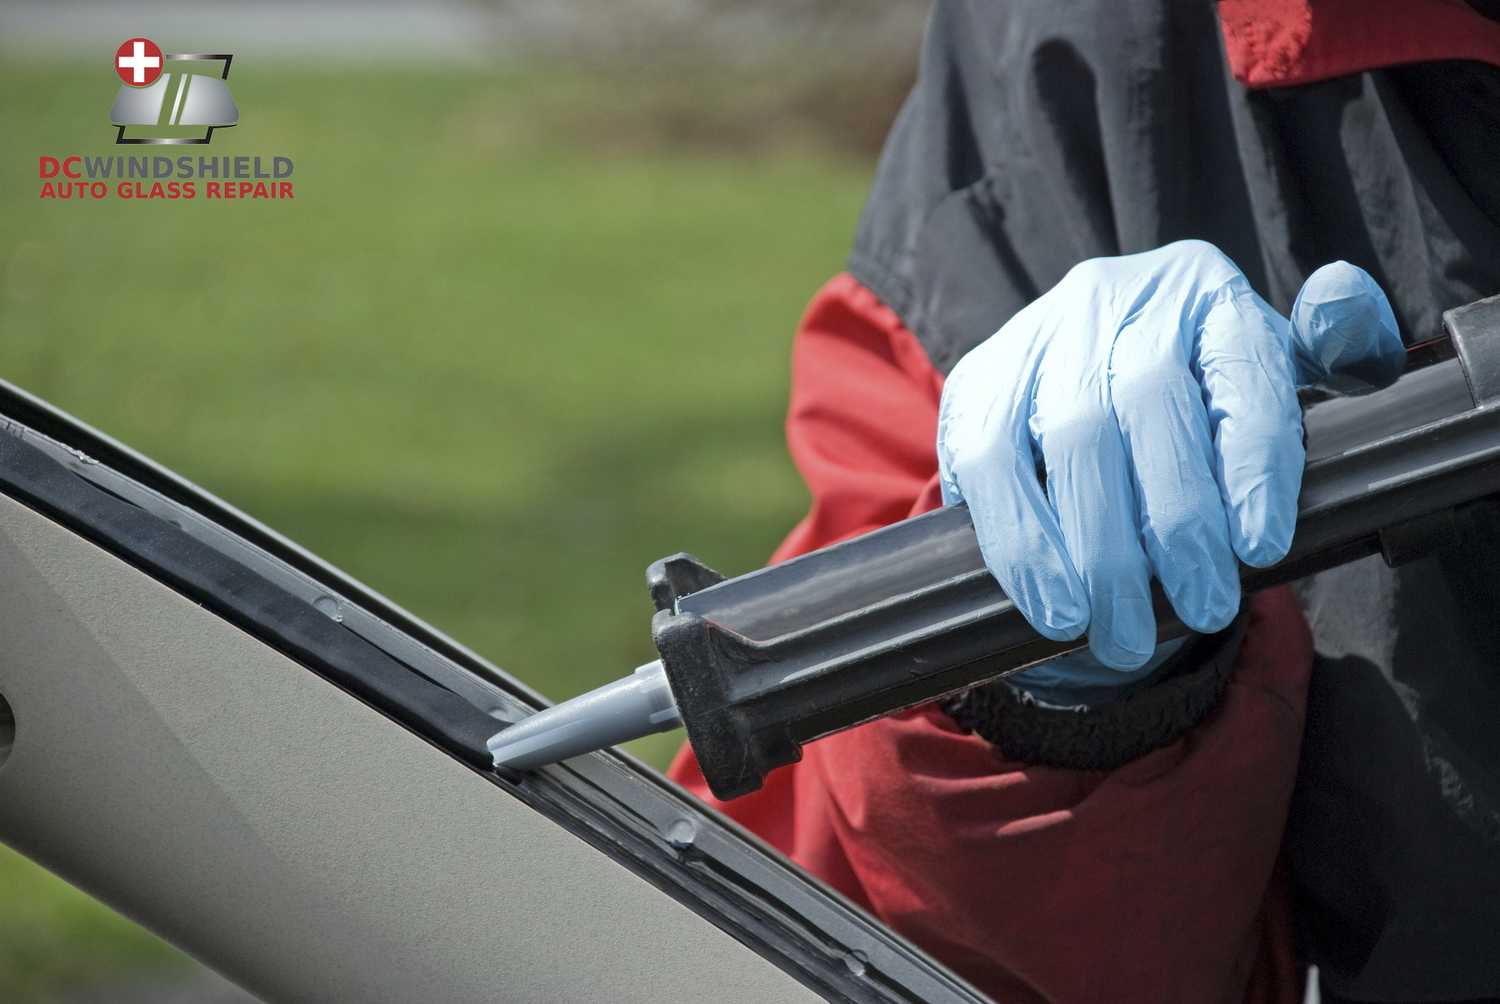 DC-windshield-auto-car-glass-repair-replacement-1.jpeg